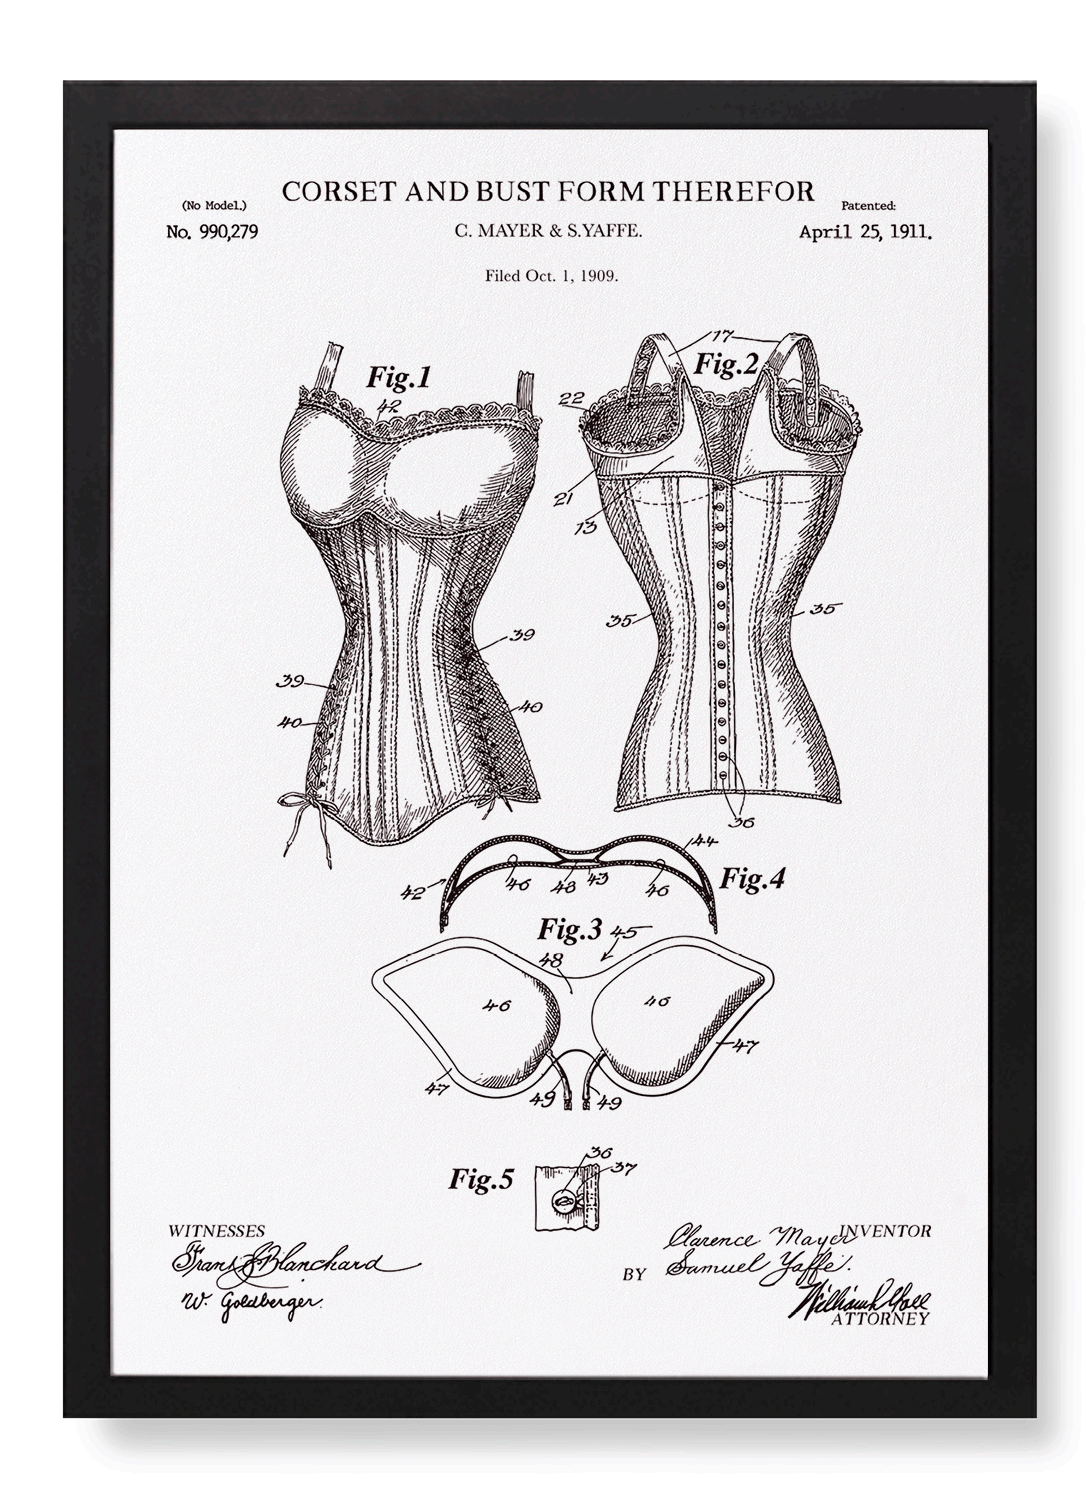 PATENT OF CORSET AND BUST (1911)